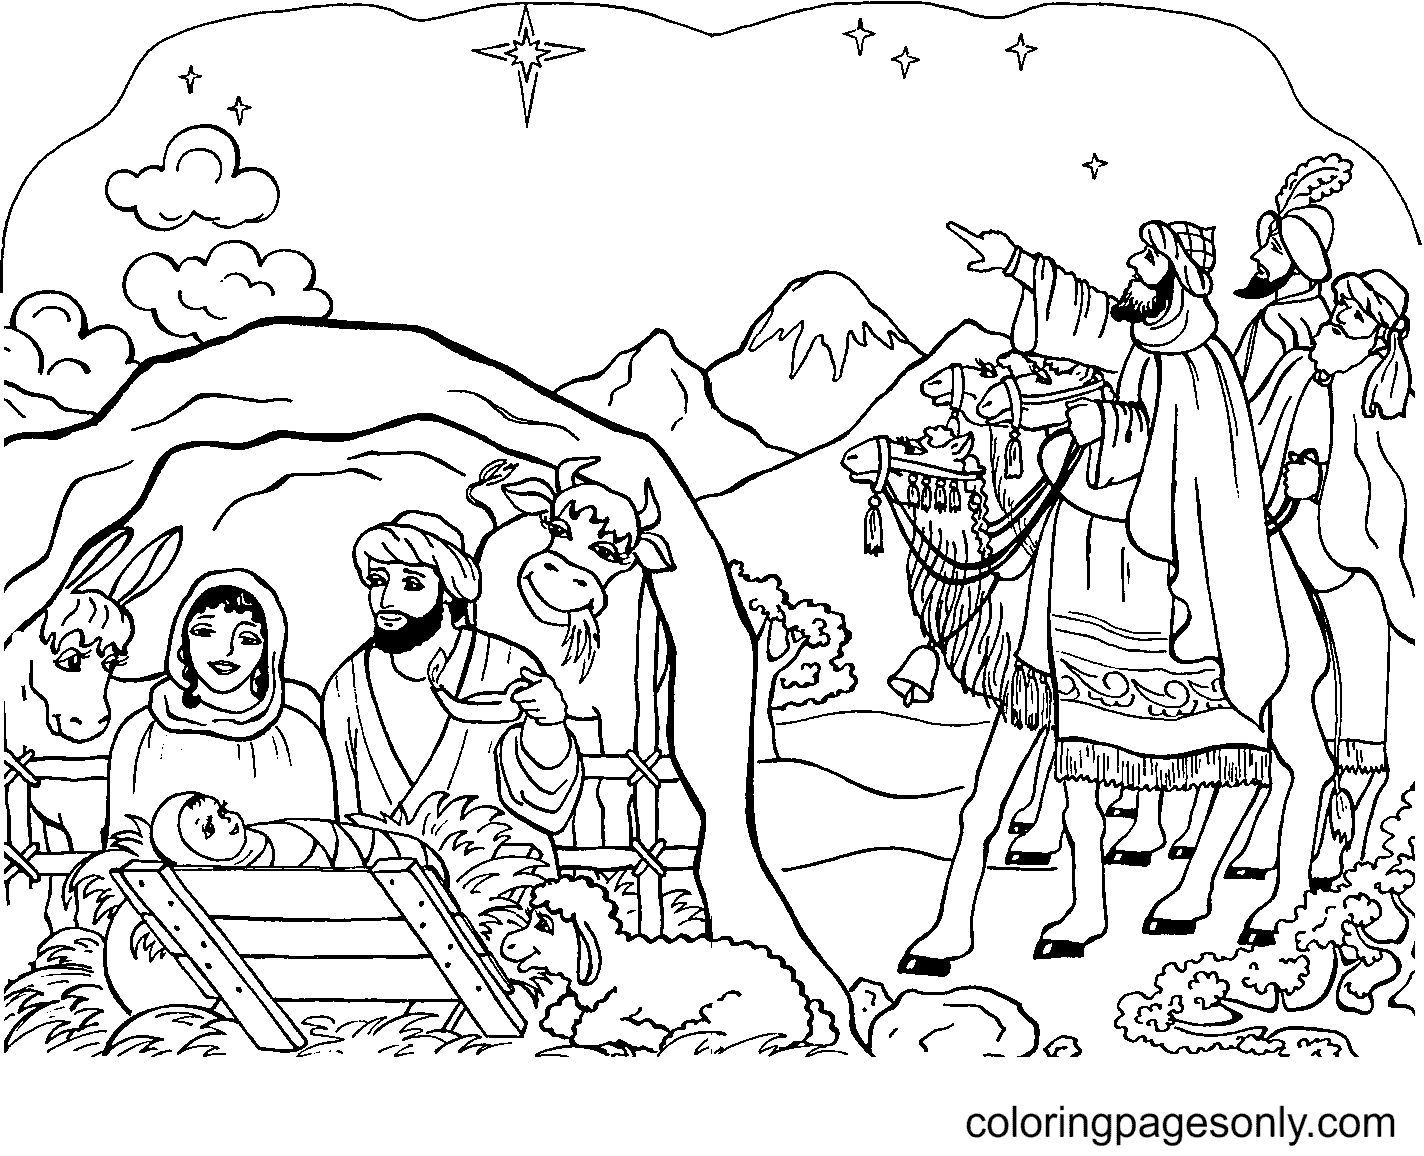 Printable Religious Christmas Coloring Page